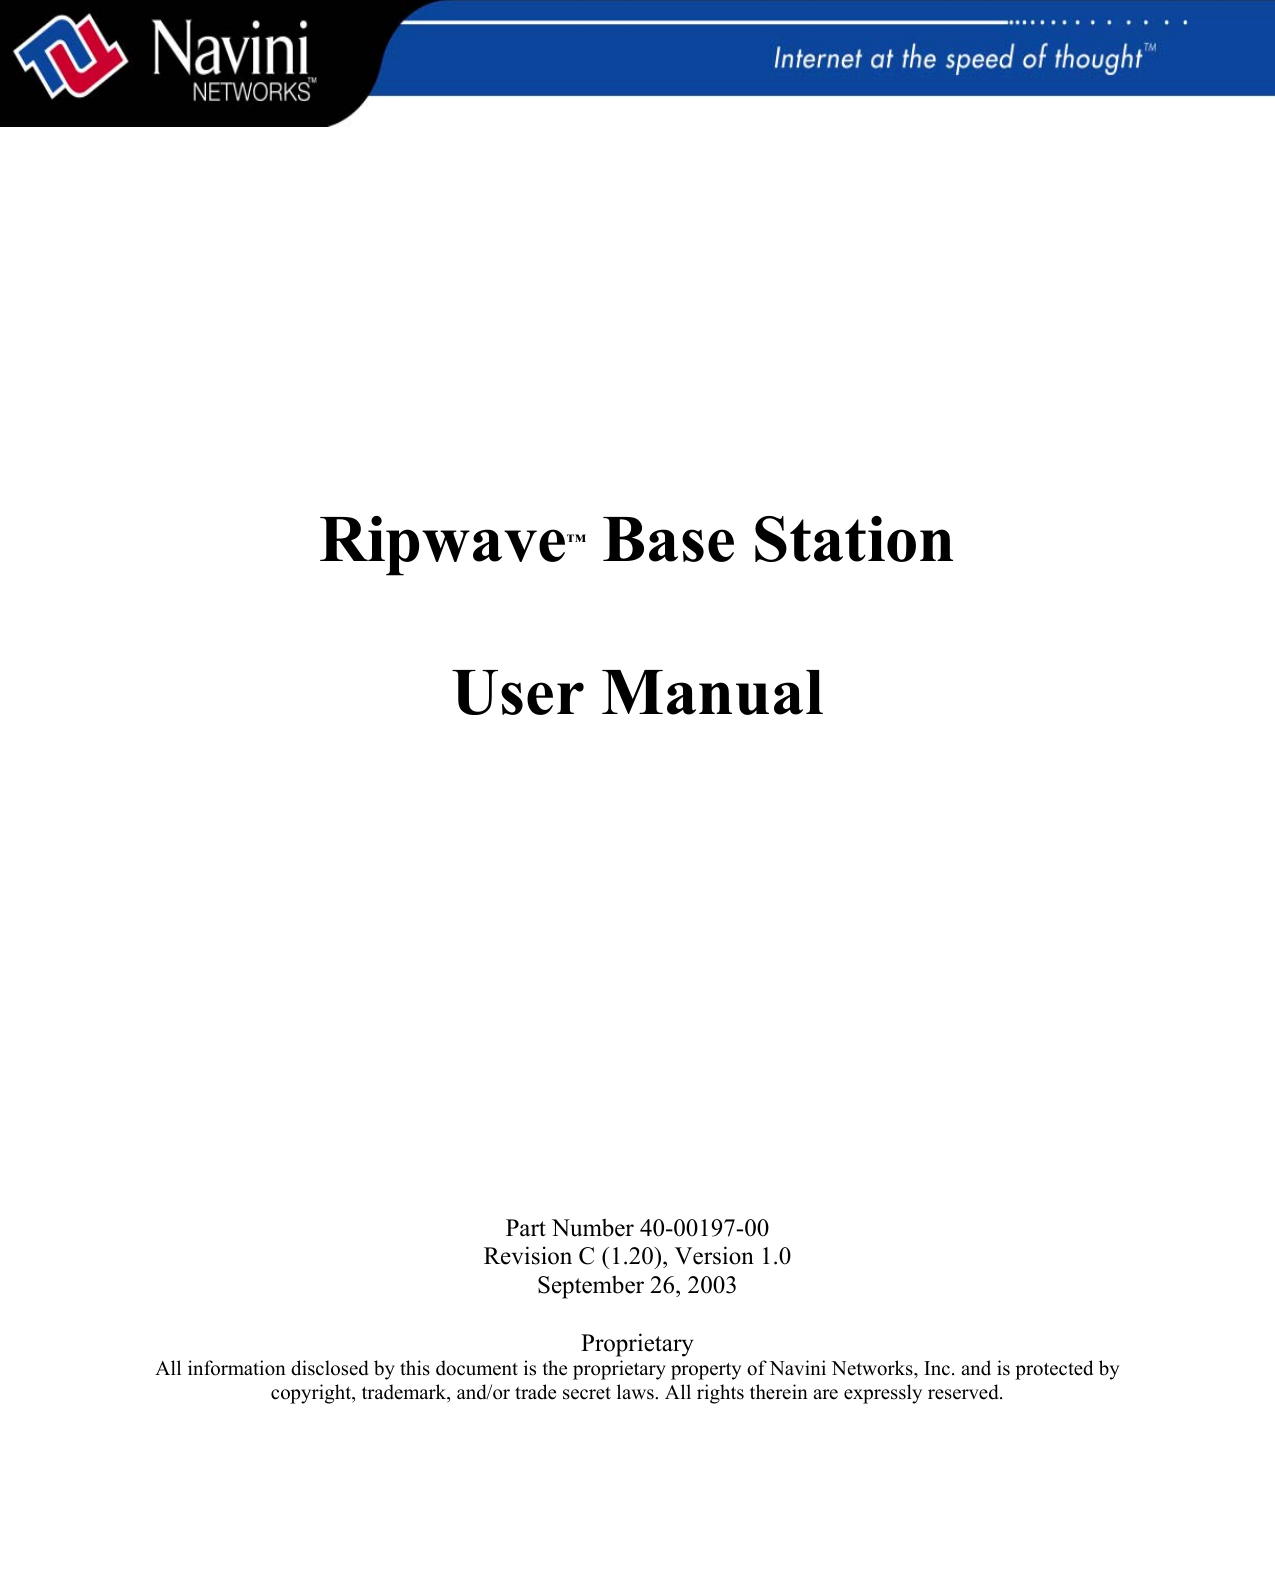                Ripwave™ Base Station   User Manual                   Part Number 40-00197-00 Revision C (1.20), Version 1.0 September 26, 2003  Proprietary All information disclosed by this document is the proprietary property of Navini Networks, Inc. and is protected by copyright, trademark, and/or trade secret laws. All rights therein are expressly reserved.  